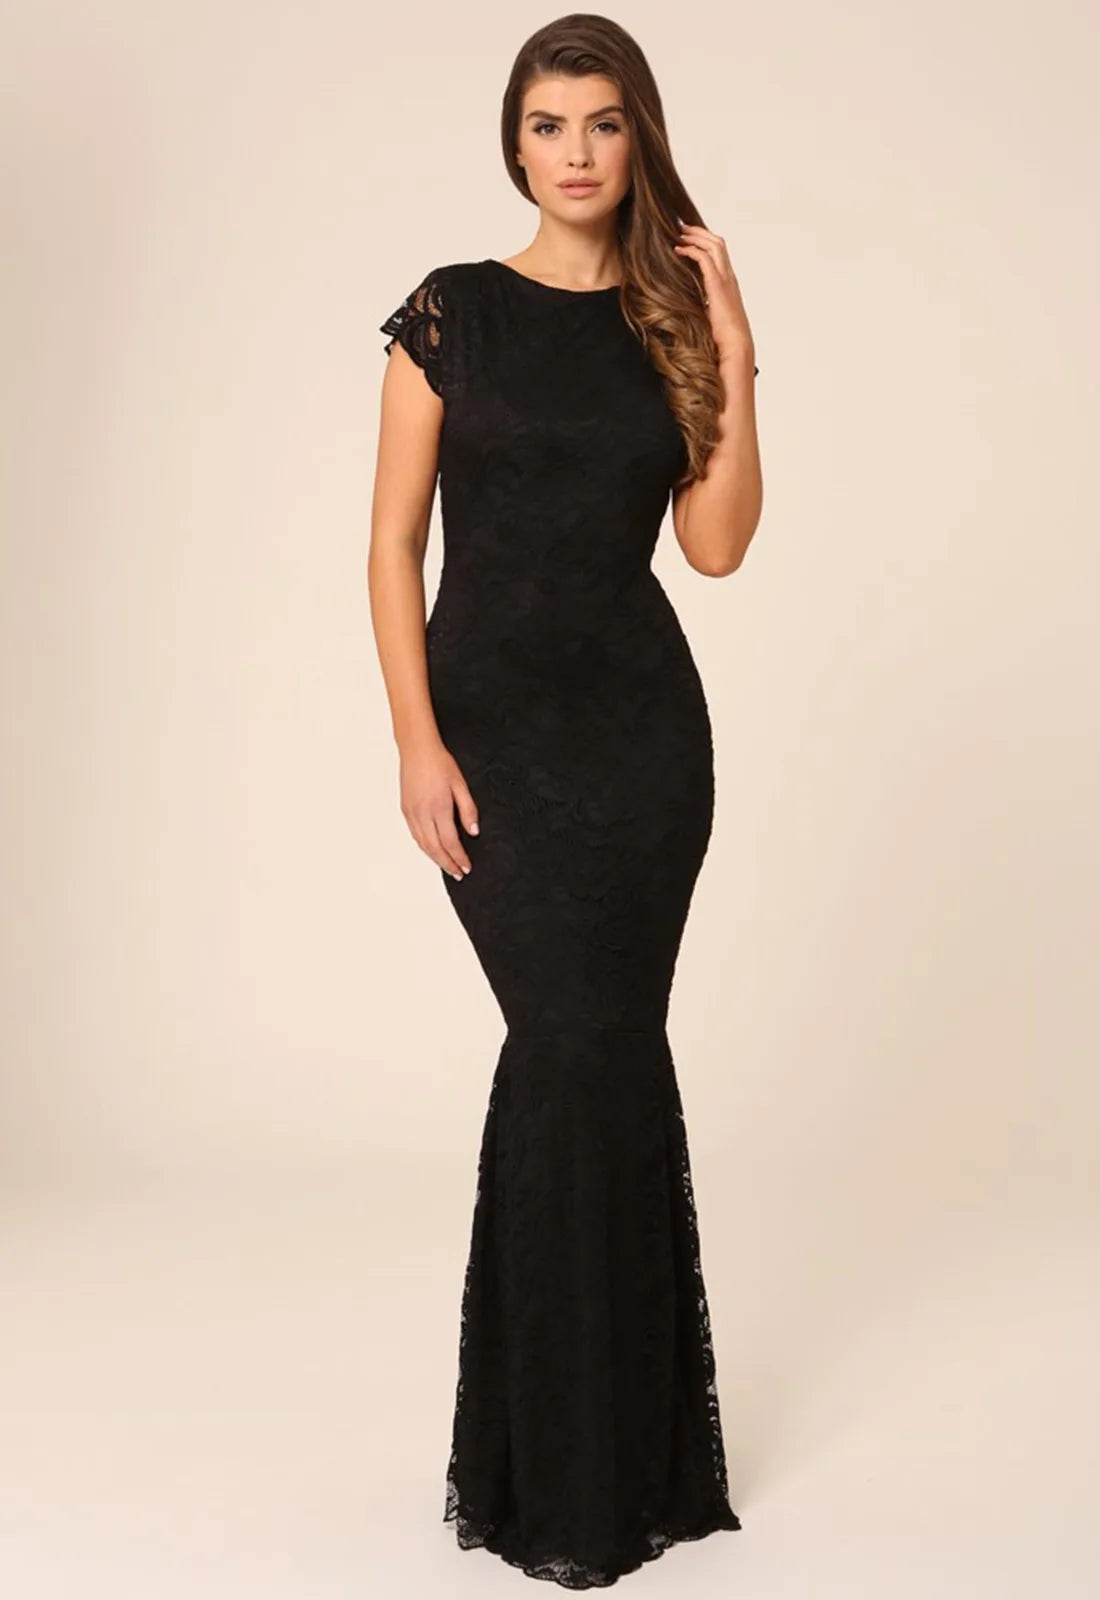 Honor Gold Faye Cap Sleeve Backless Lace Maxi Dress in Black